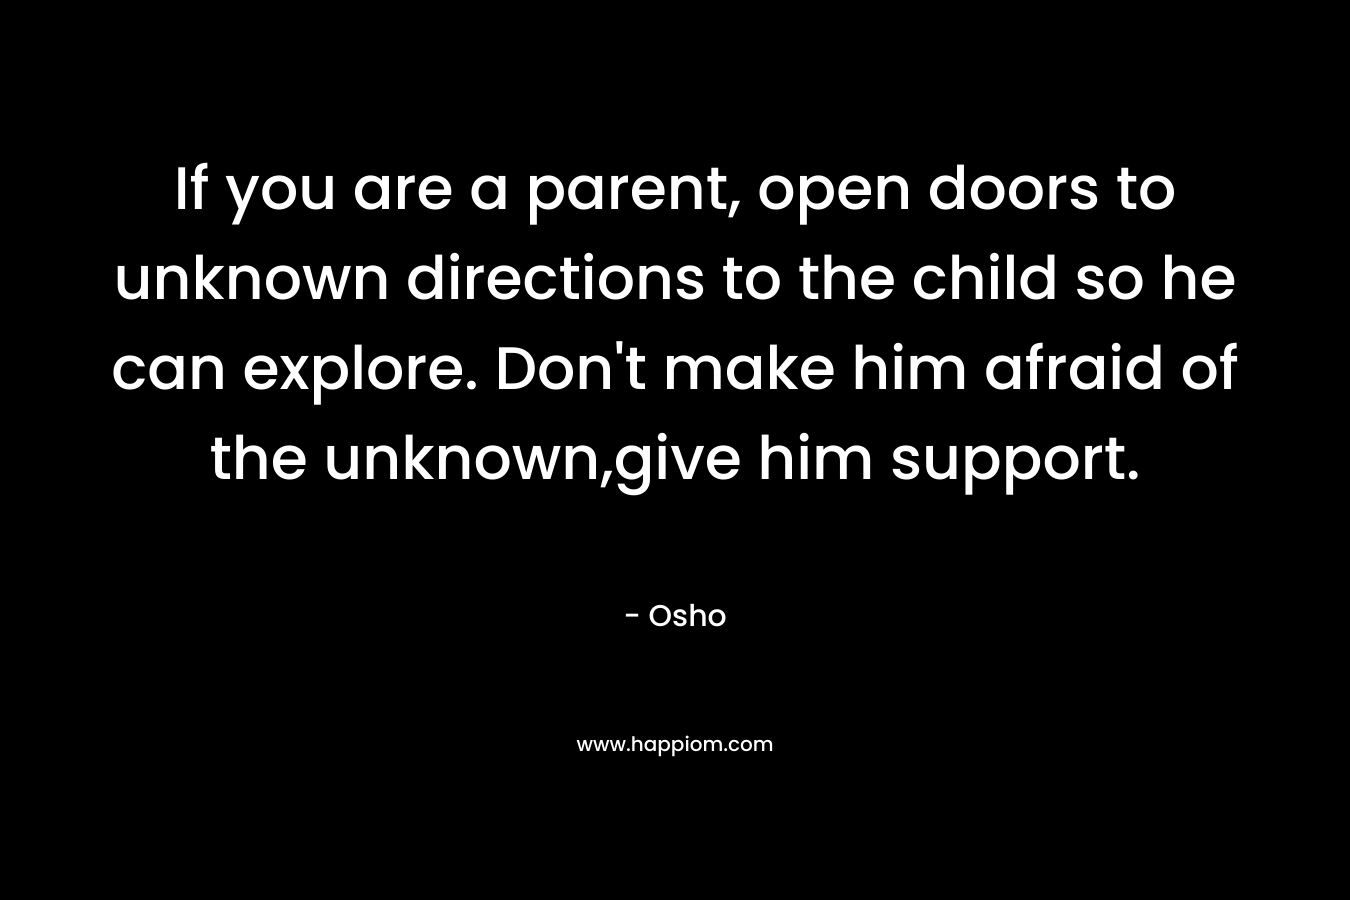 If you are a parent, open doors to unknown directions to the child so he can explore. Don’t make him afraid of the unknown,give him support.  – Osho